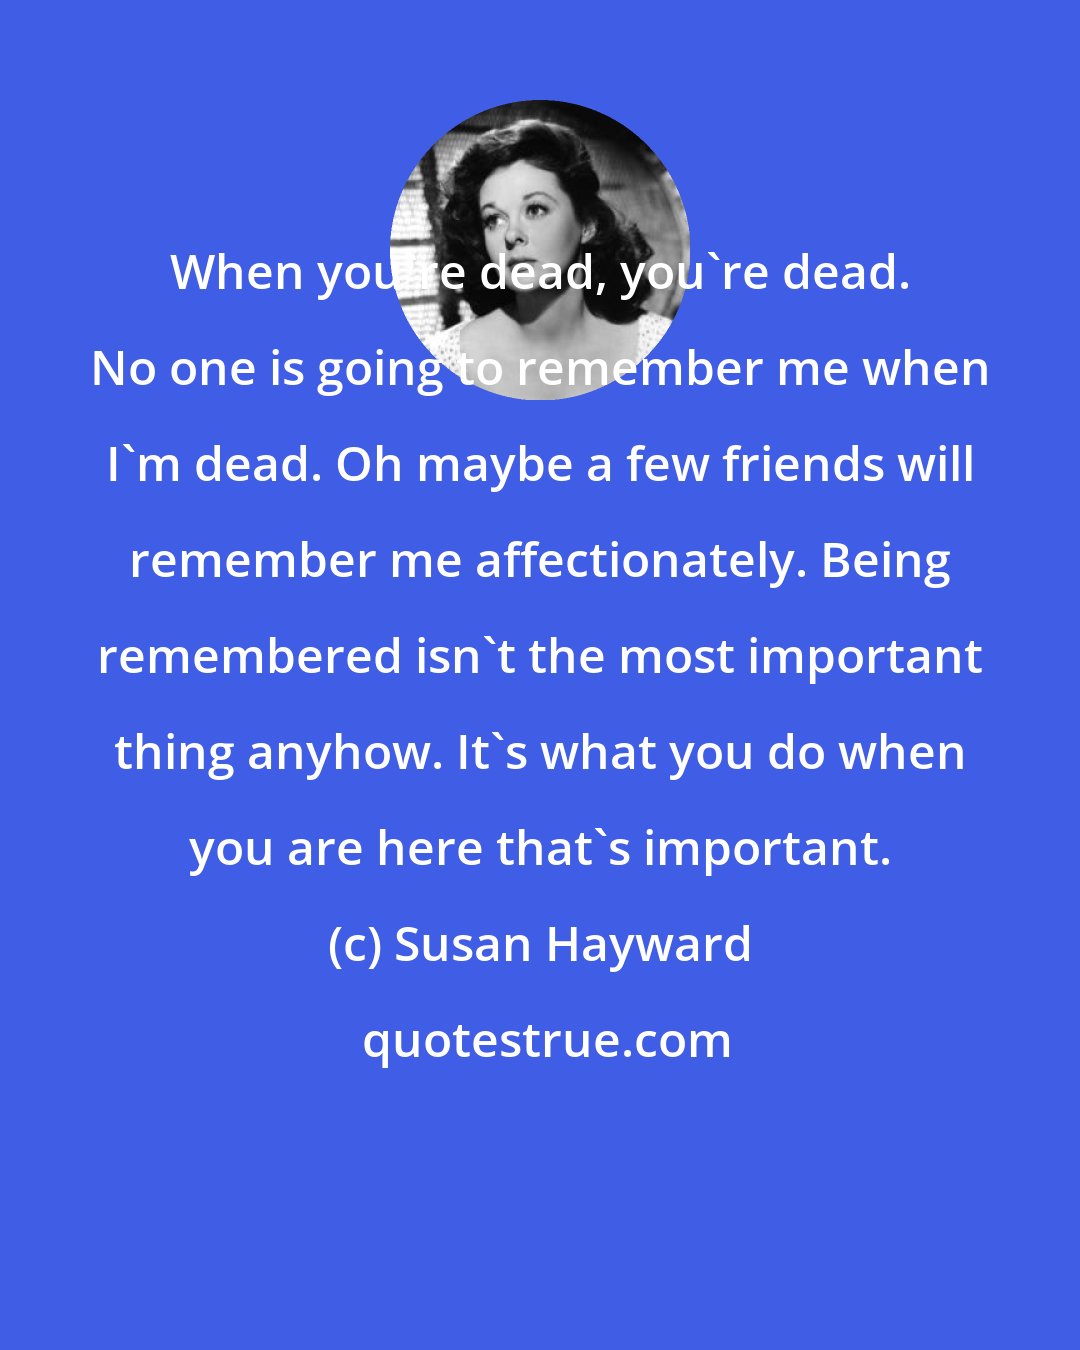 Susan Hayward: When you're dead, you're dead. No one is going to remember me when I'm dead. Oh maybe a few friends will remember me affectionately. Being remembered isn't the most important thing anyhow. It's what you do when you are here that's important.